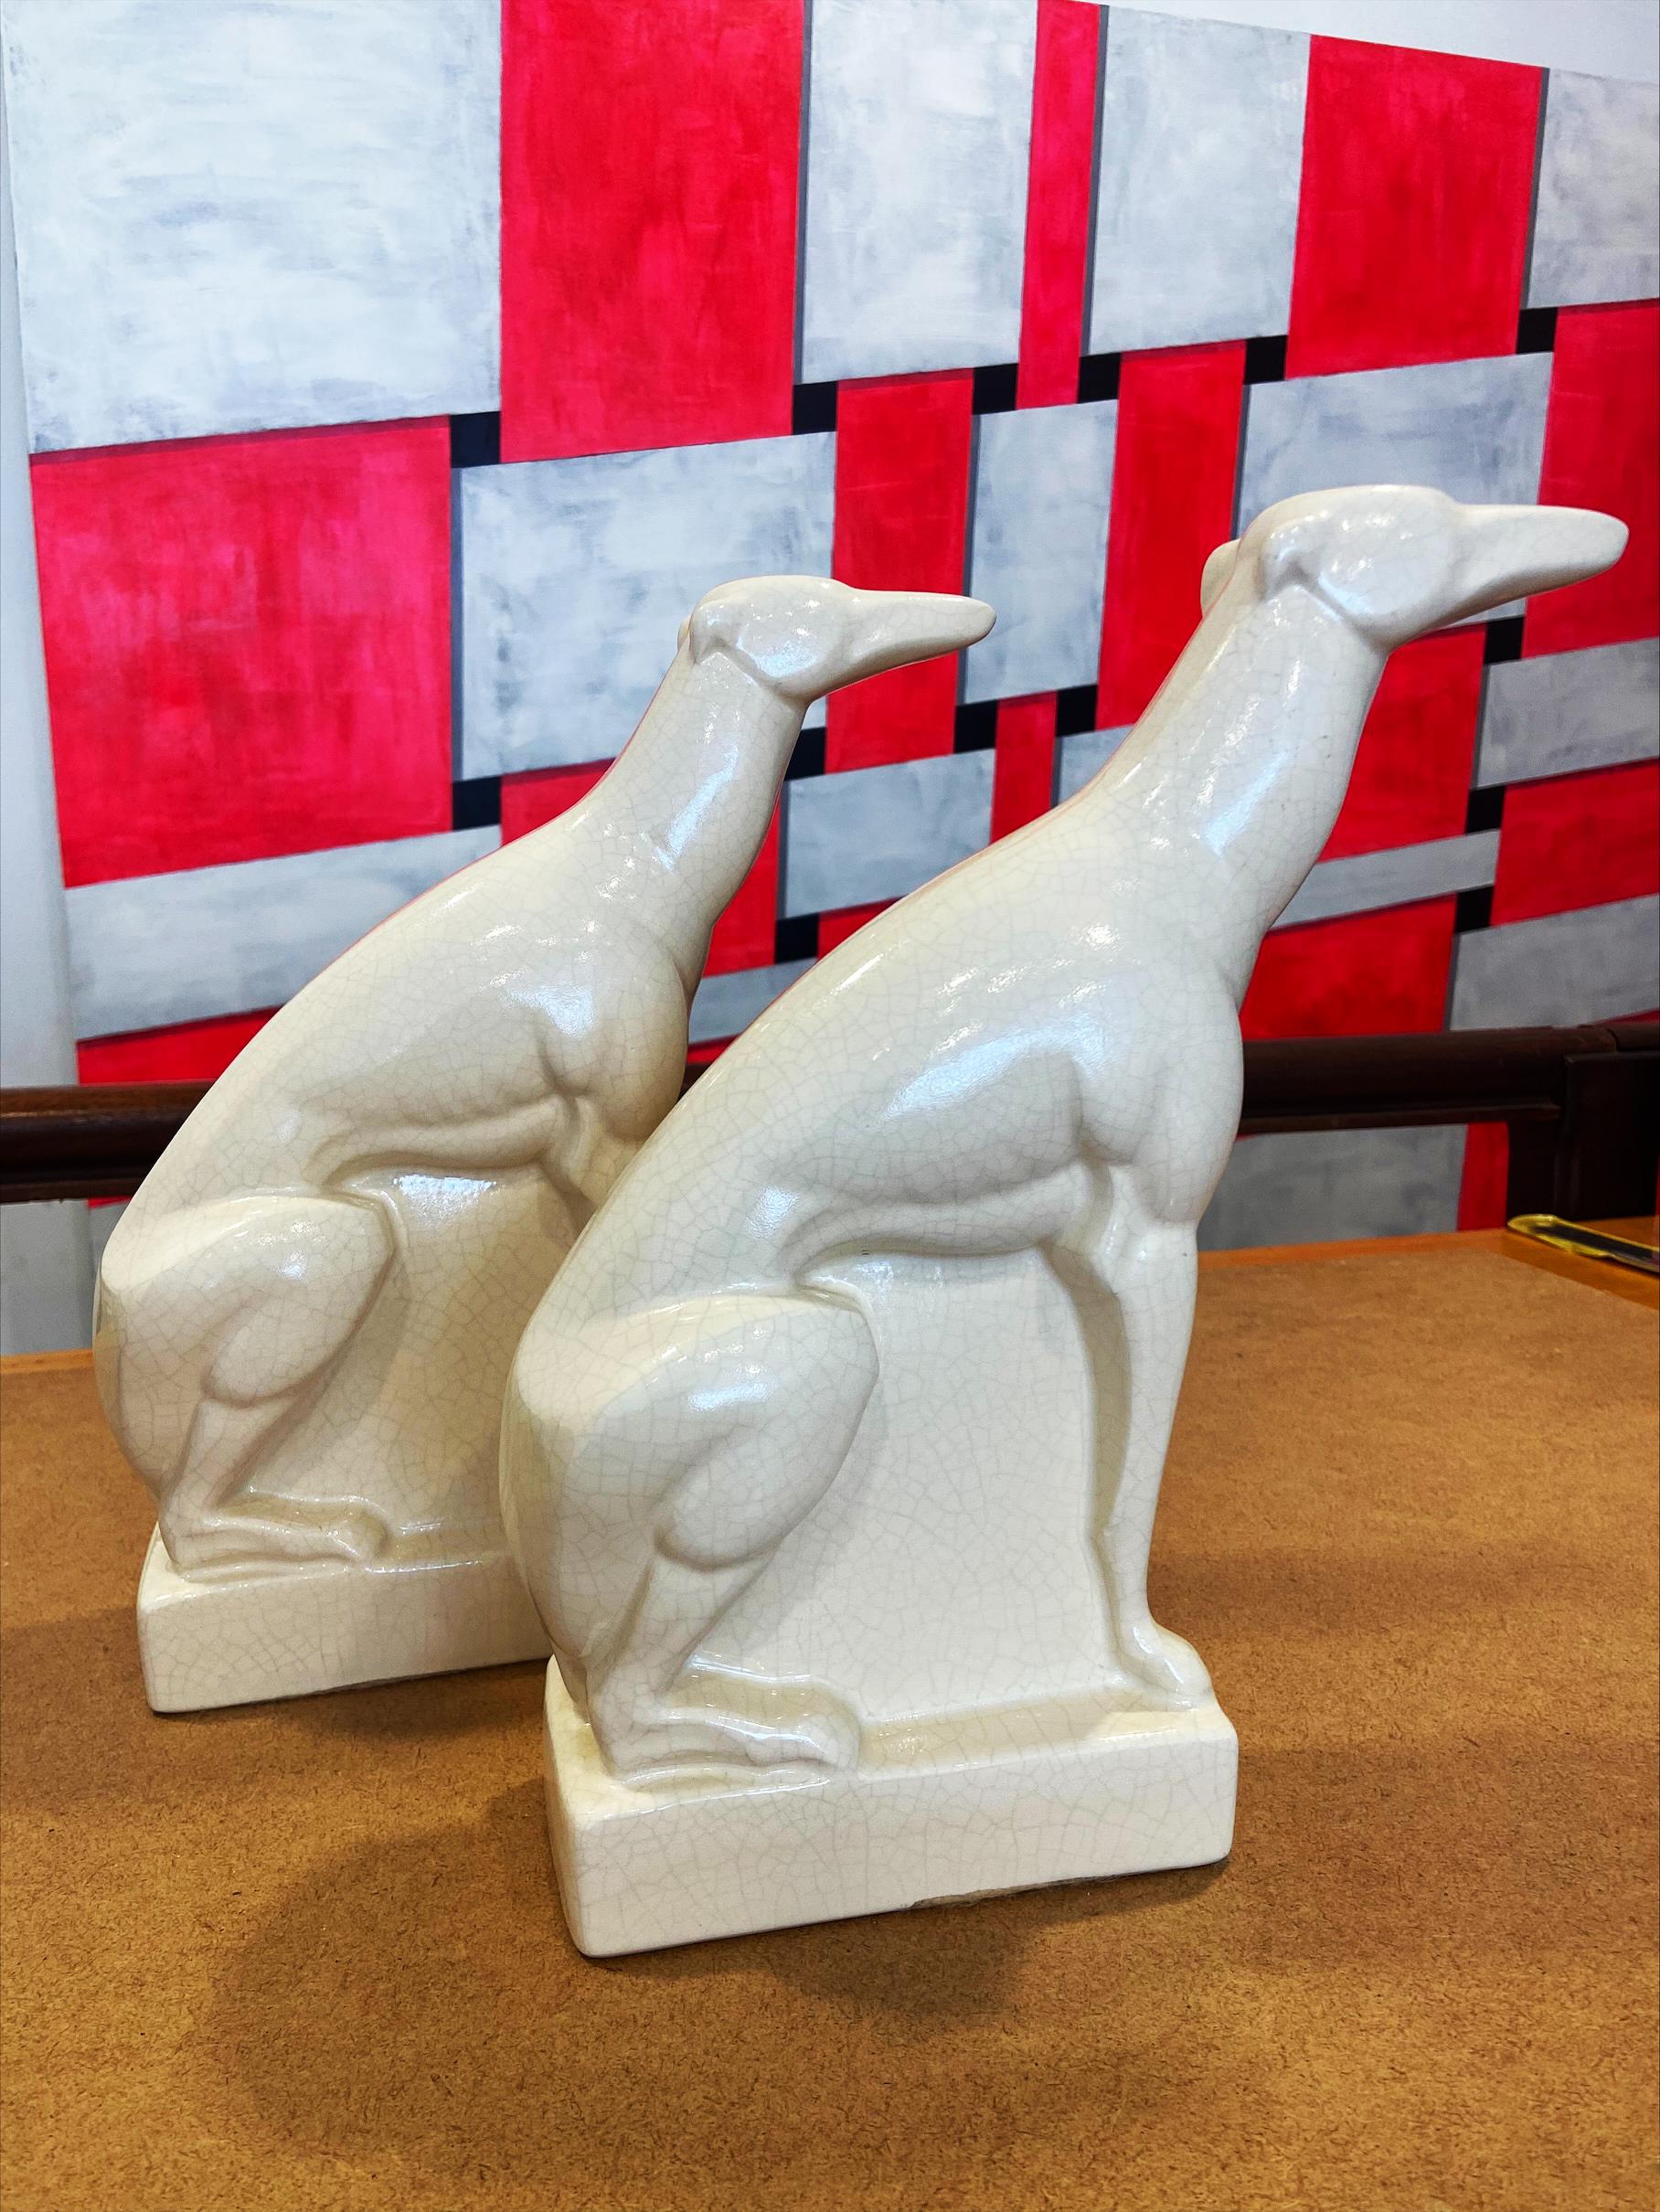 Pair of greyhounds - Charles Lemanceau 
For the Saint Clément factory
Cracked ceramics
H30xW21xD8cm
1925
Perfect condition.